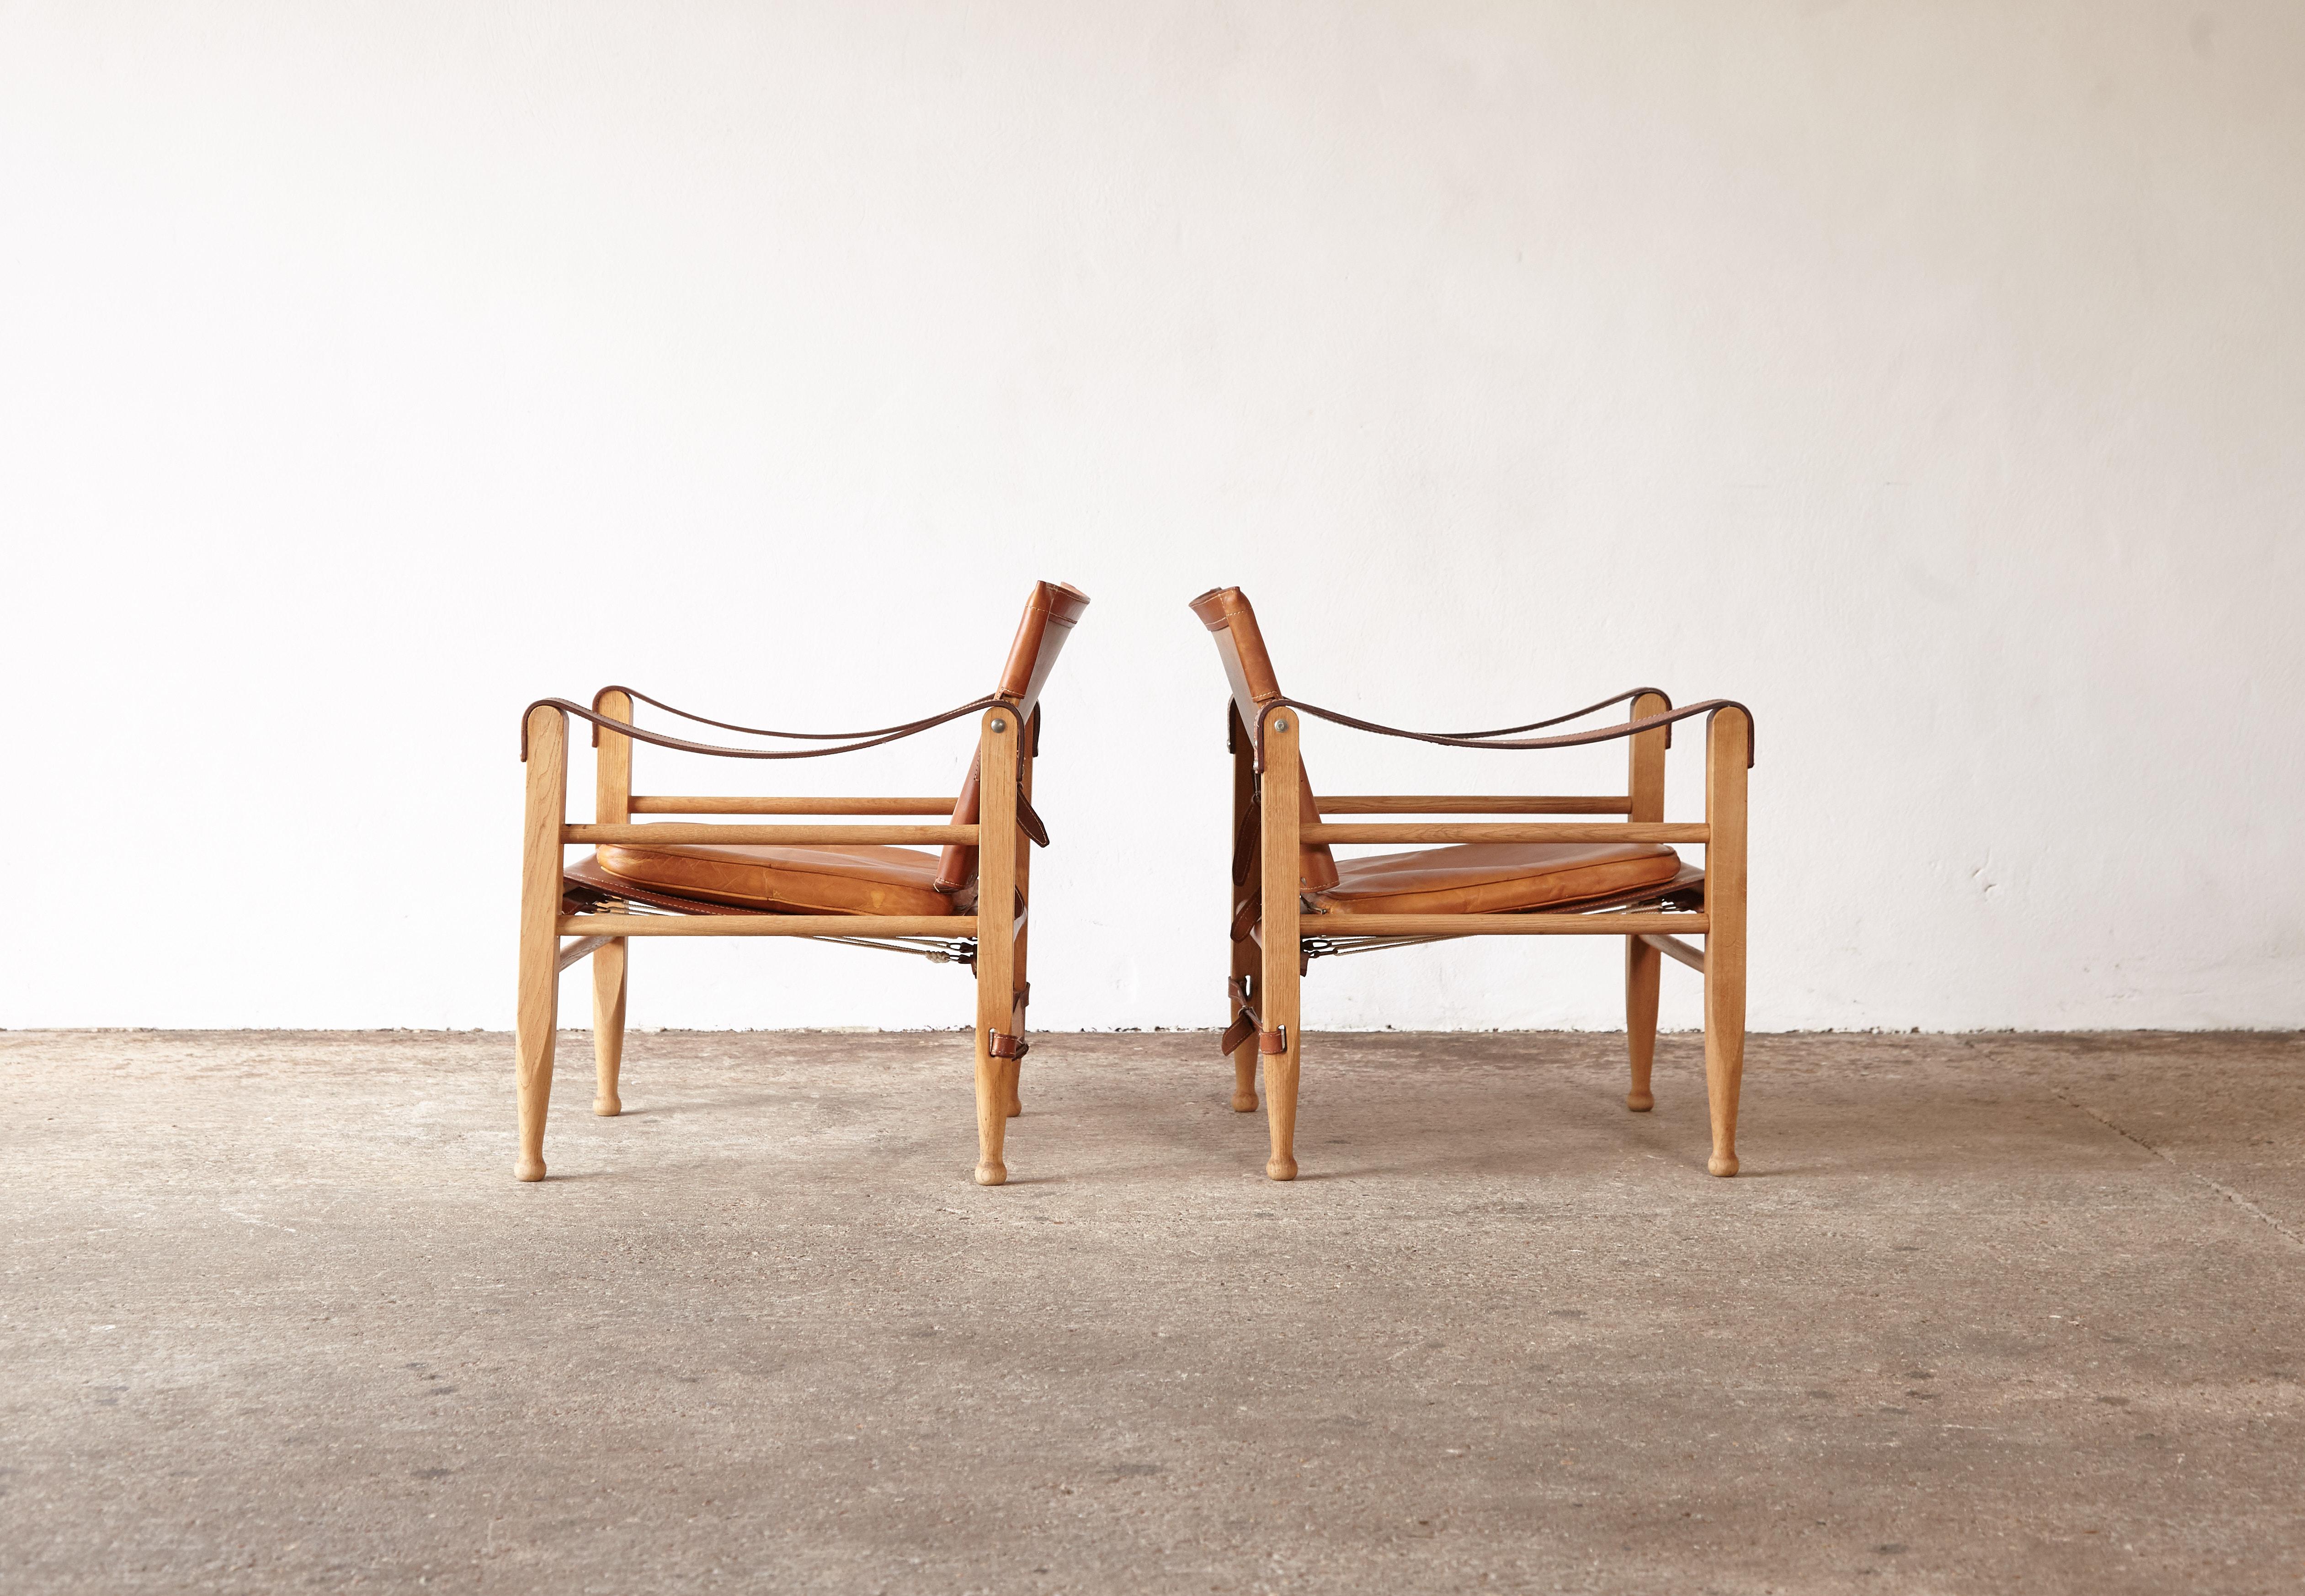 20th Century Aage Bruun and Son Safari Chairs in Patinated Tan Leather, Denmark, 1960s